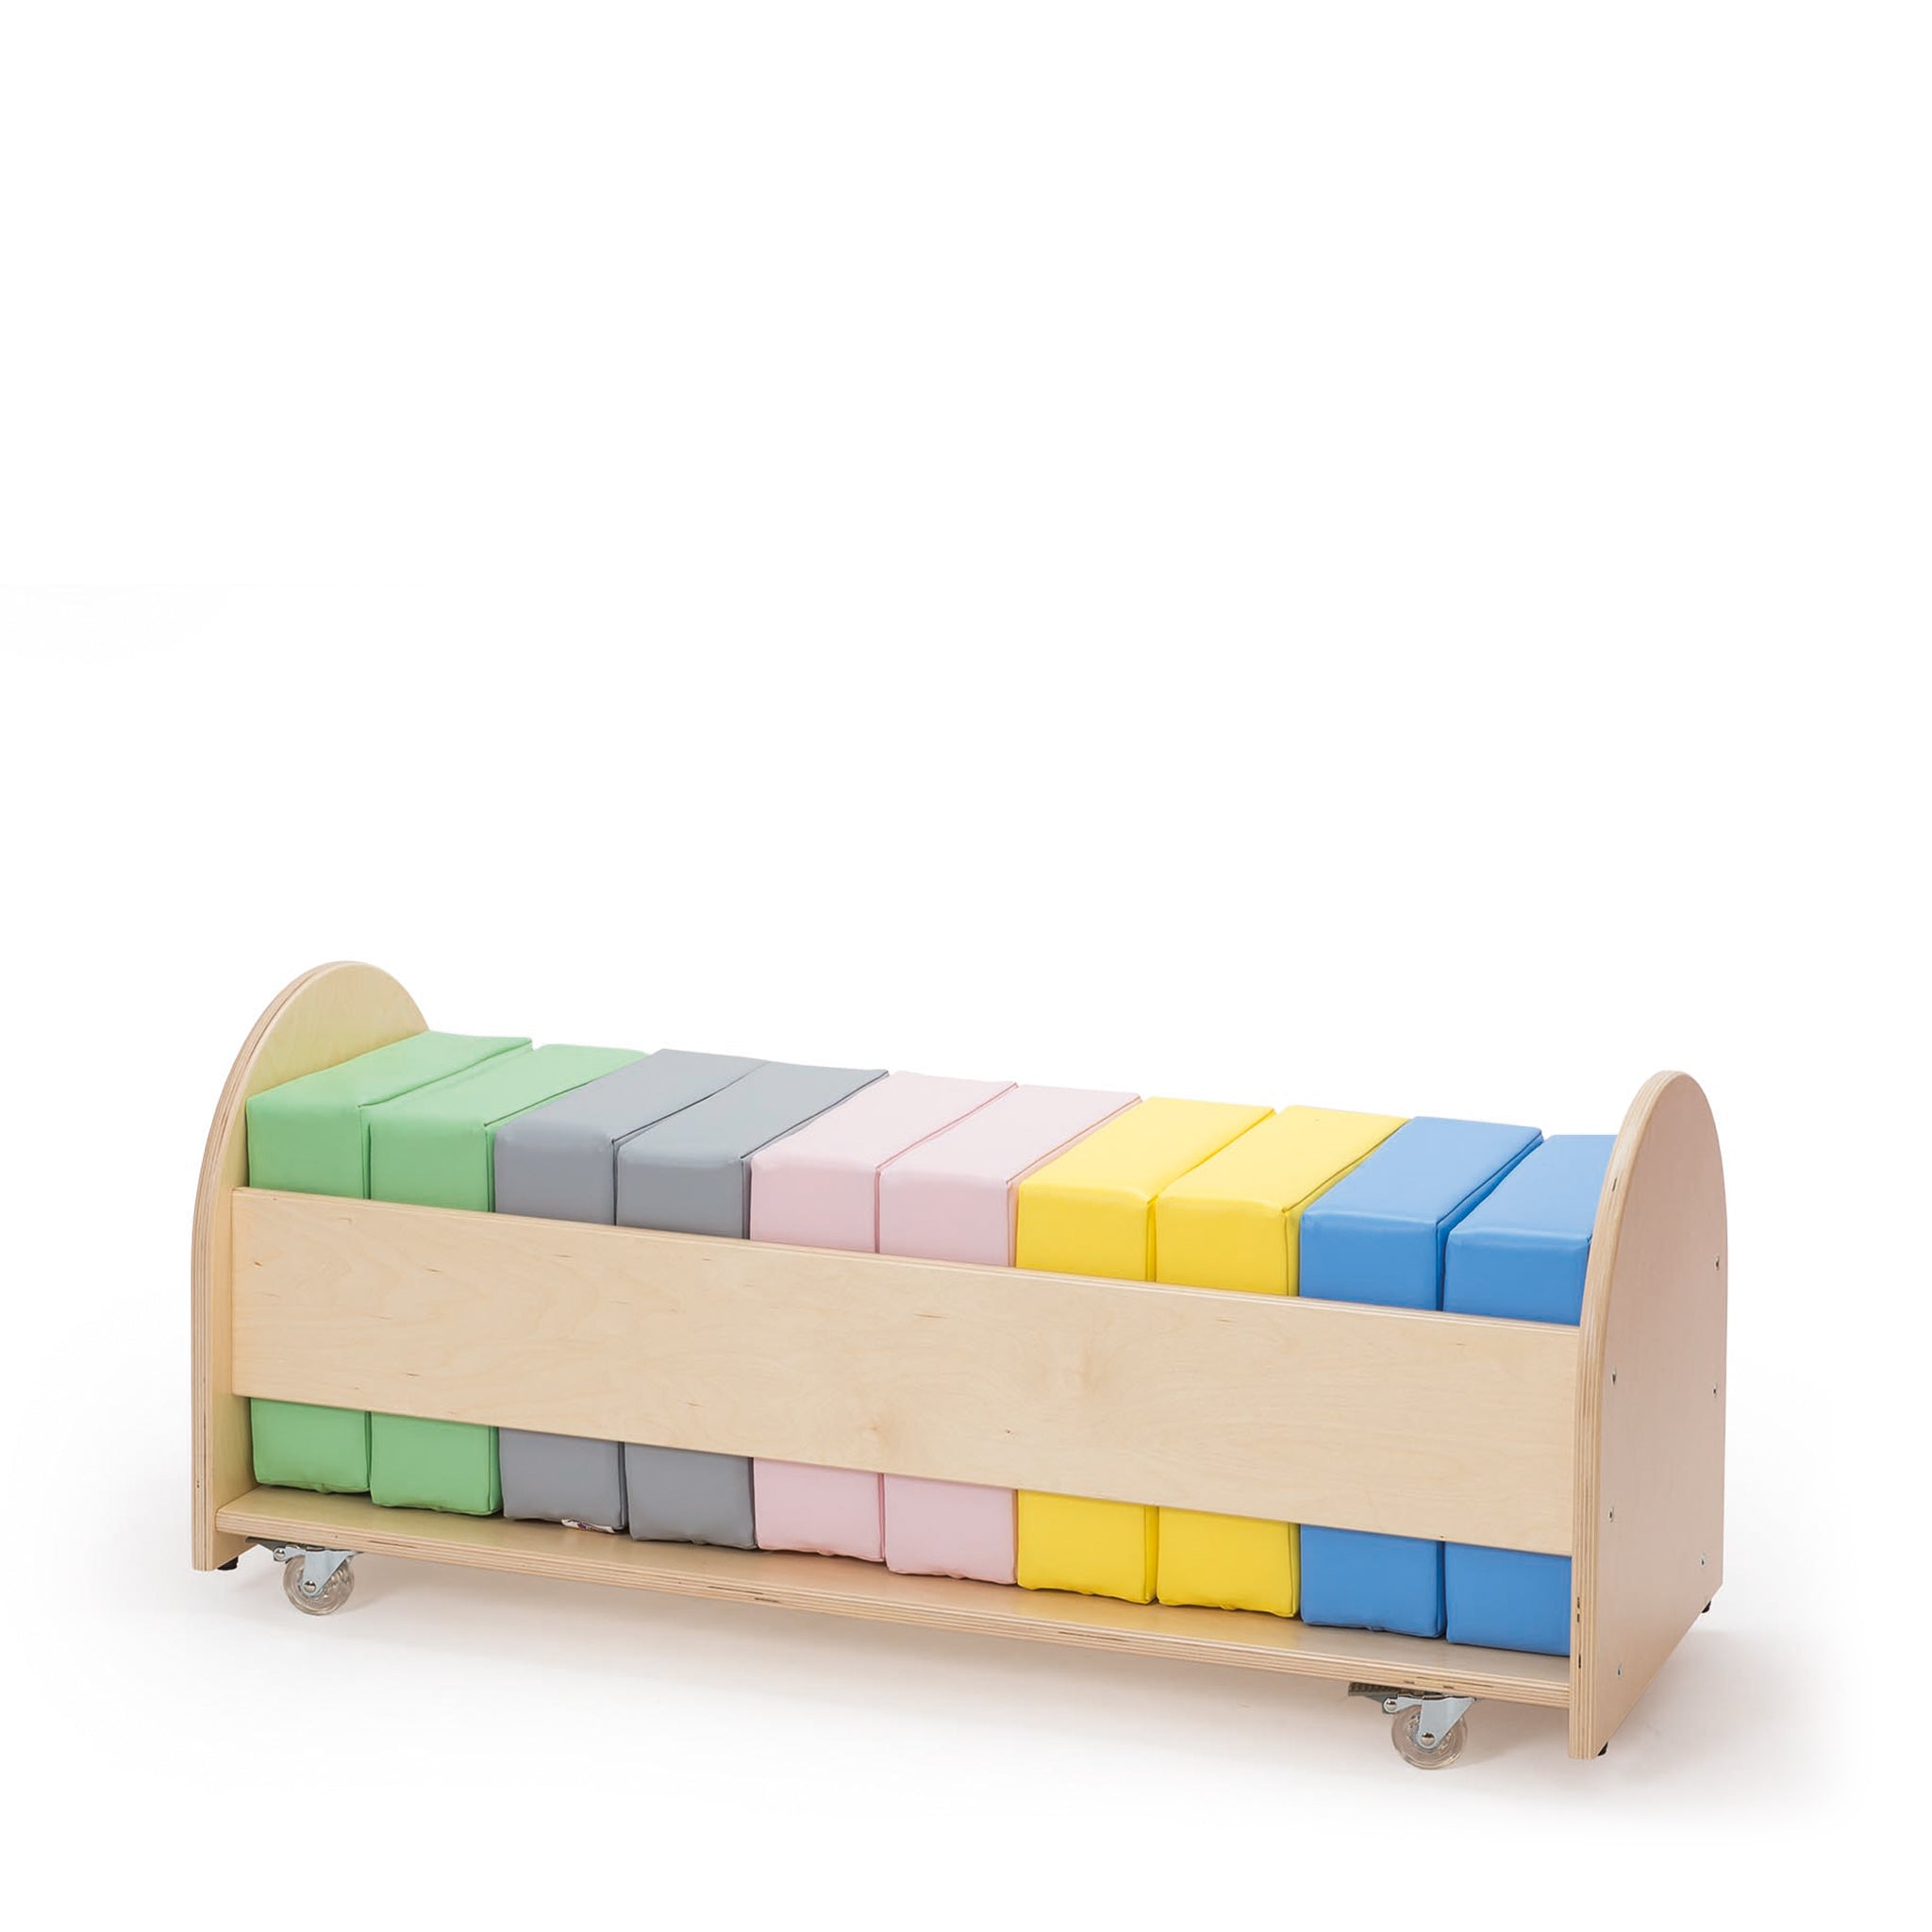 SET OF PASTEL POUFS IN STAND ON WHEELS